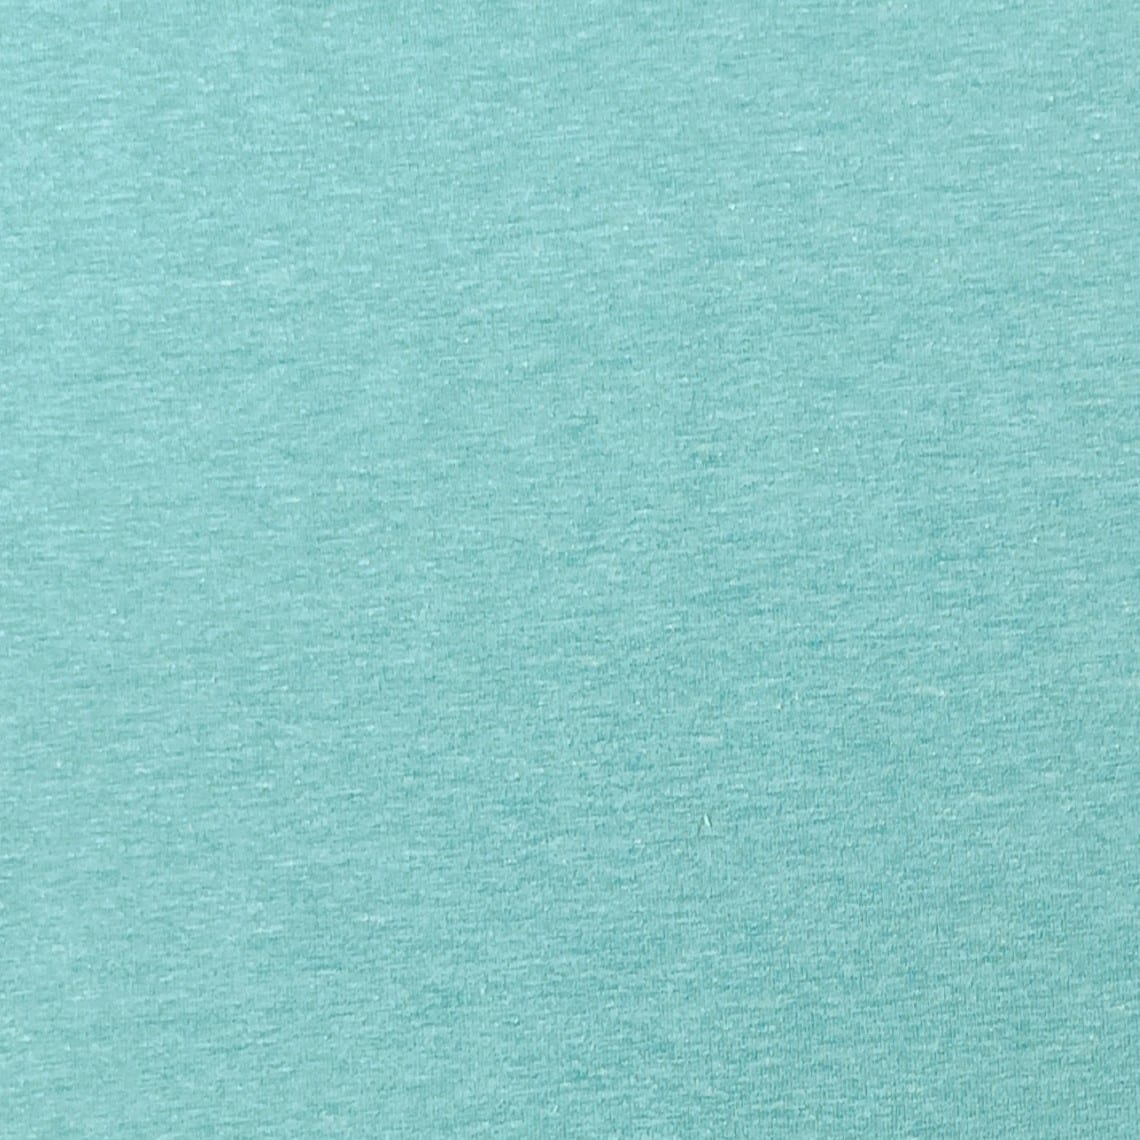 Turquoise Melange Cotton Jersey fabric | More Sewing